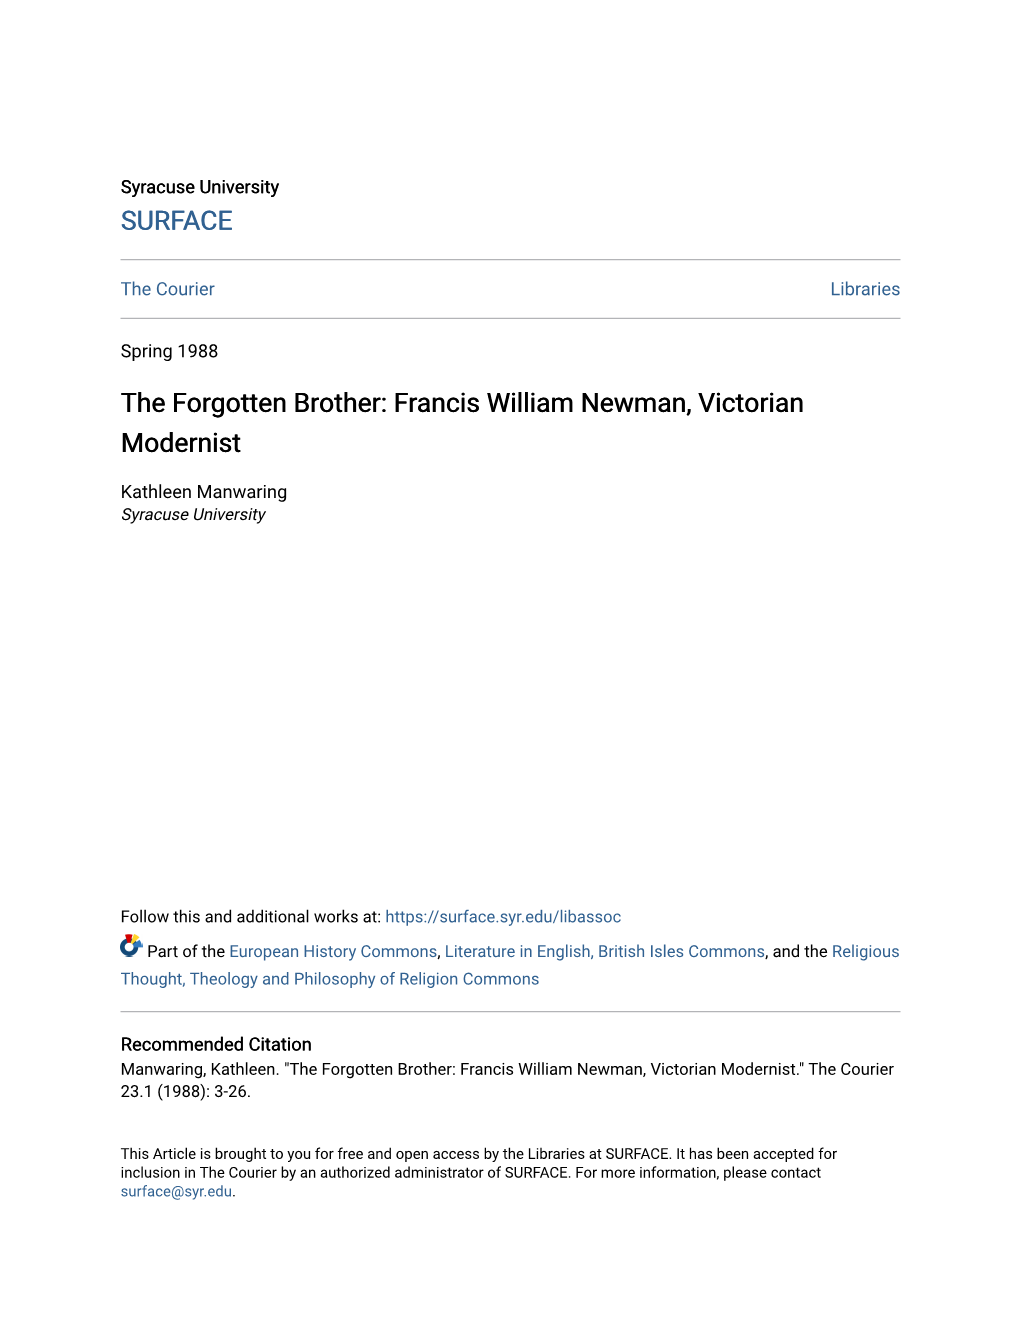 The Forgotten Brother: Francis William Newman, Victorian Modernist